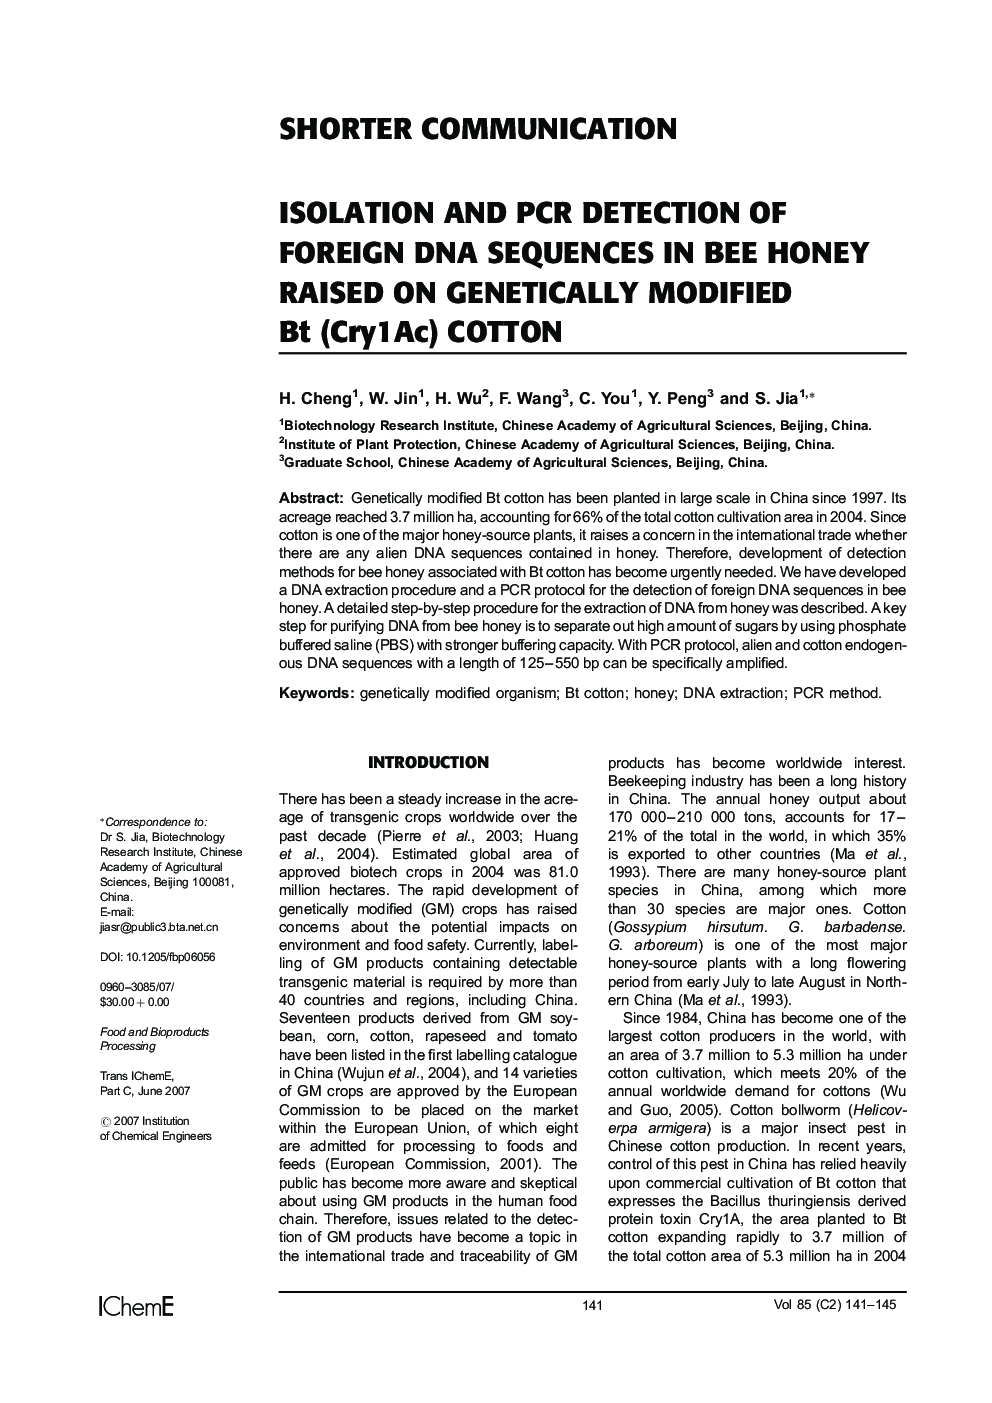 Isolation and PCR Detection of Foreign DNA Sequences in Bee Honey Raised on Genetically Modified Bt (Cry 1 Ac) Cotton